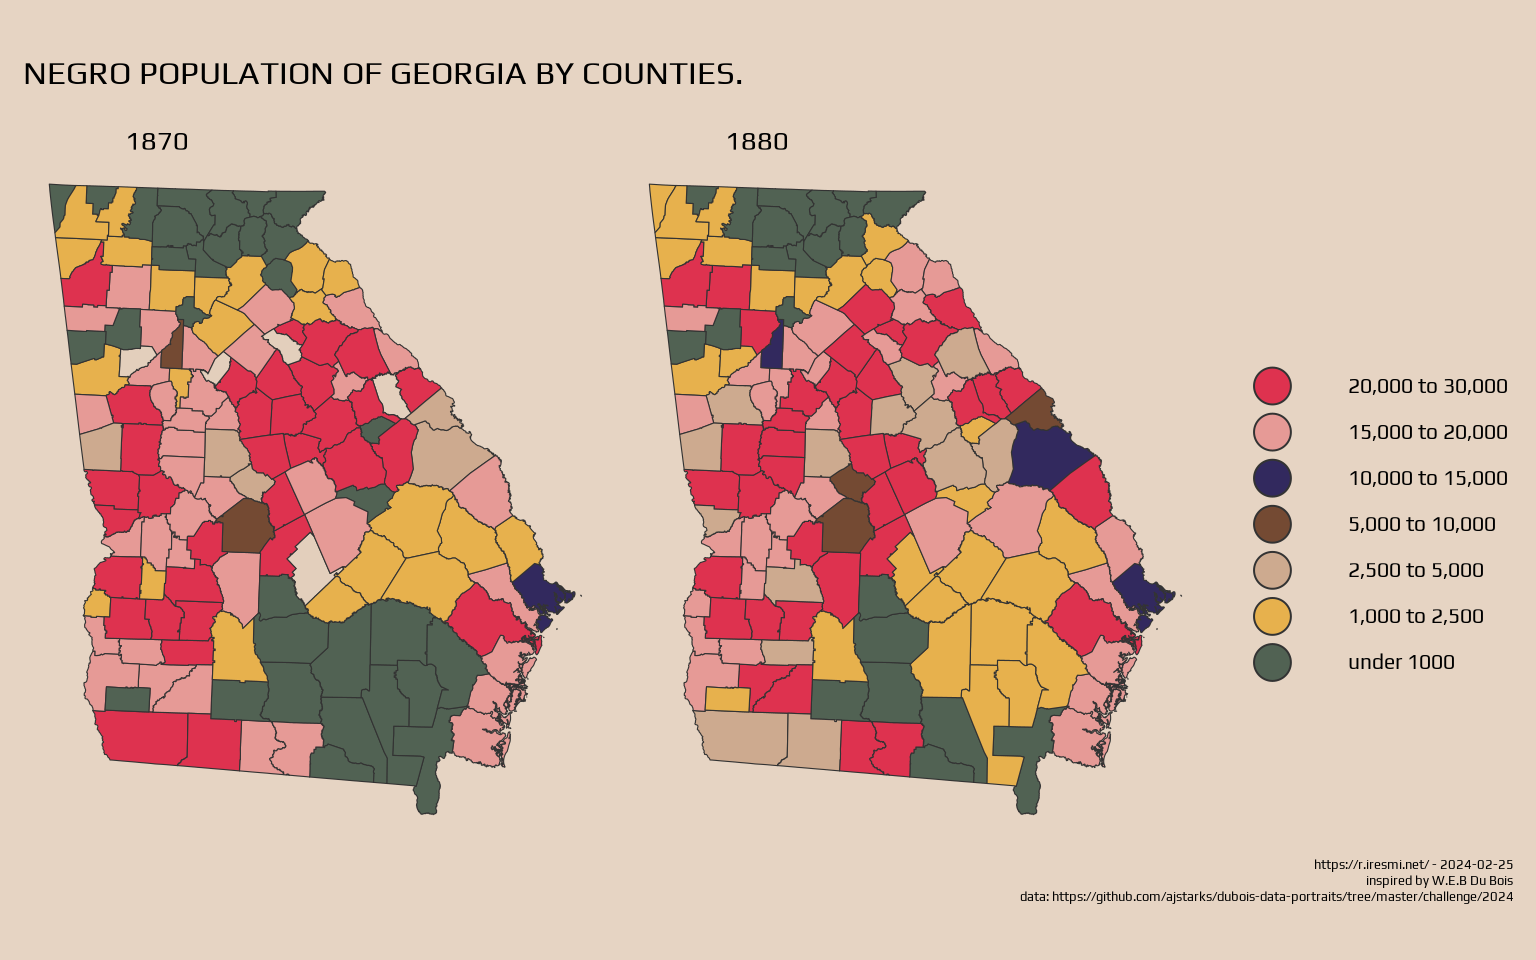 Map of negro population of Georgia by counties in 1870 and 1880 in the Dubois style